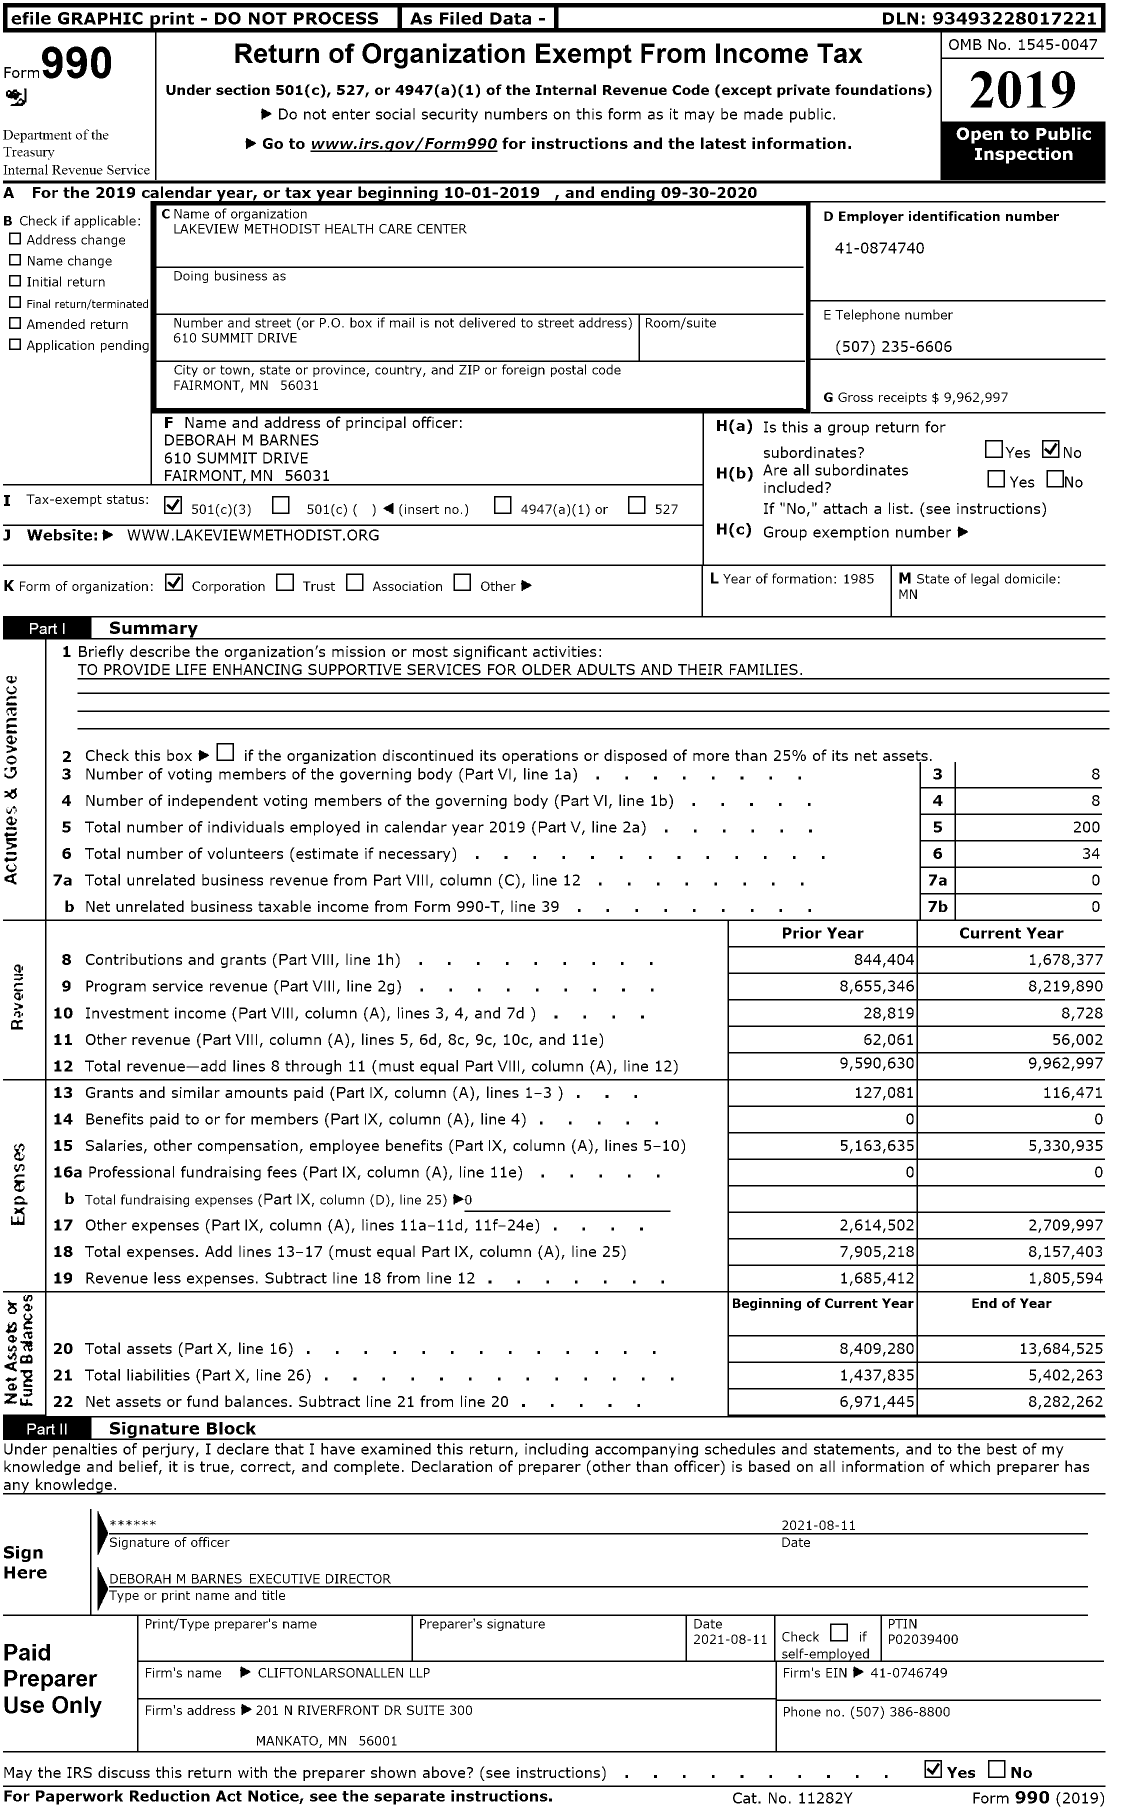 Image of first page of 2019 Form 990 for Lakeview Methodist Health Care Center